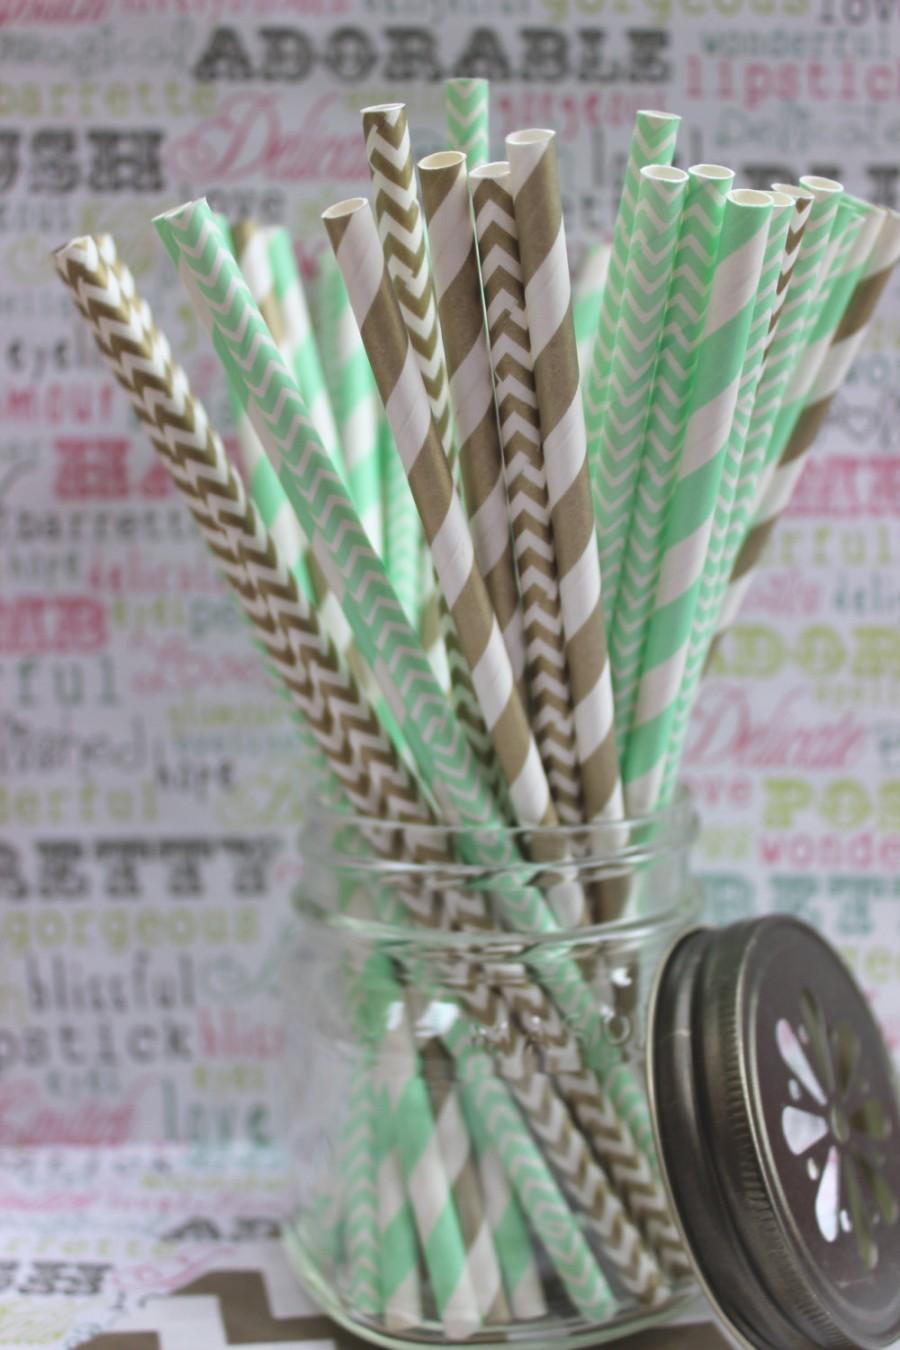 Wedding - 100 Gold and Mint Green Party Straws in Stripes and Chevron, Gold and Mint Wedding Straws with Printable DIY Flag Template - (50 ea. color)